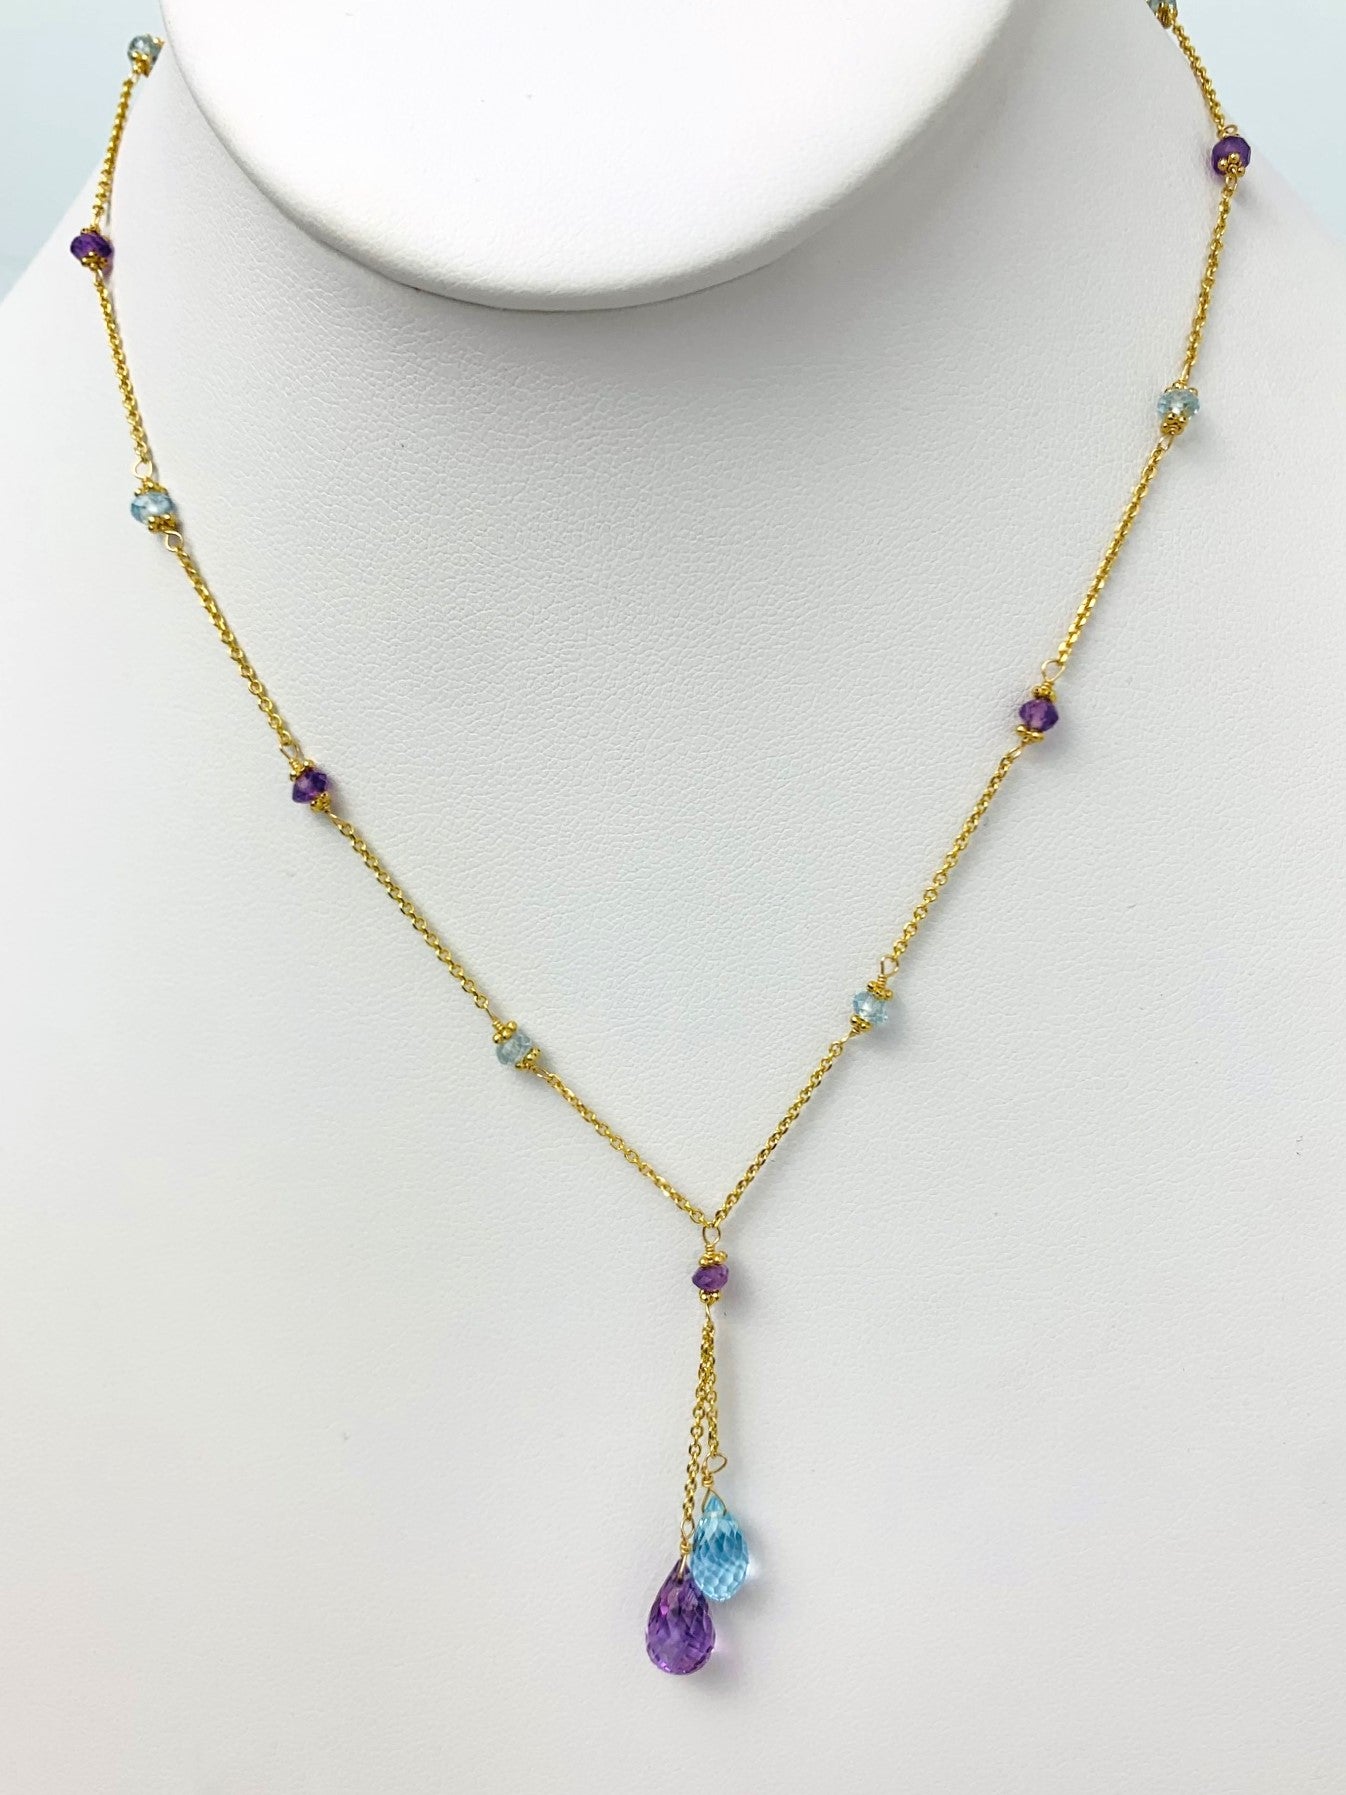 16"-17" Amethyst And Blue Topaz Lariat Station Necklace in 14KY - NCK-416-LARGM14Y-AMBT